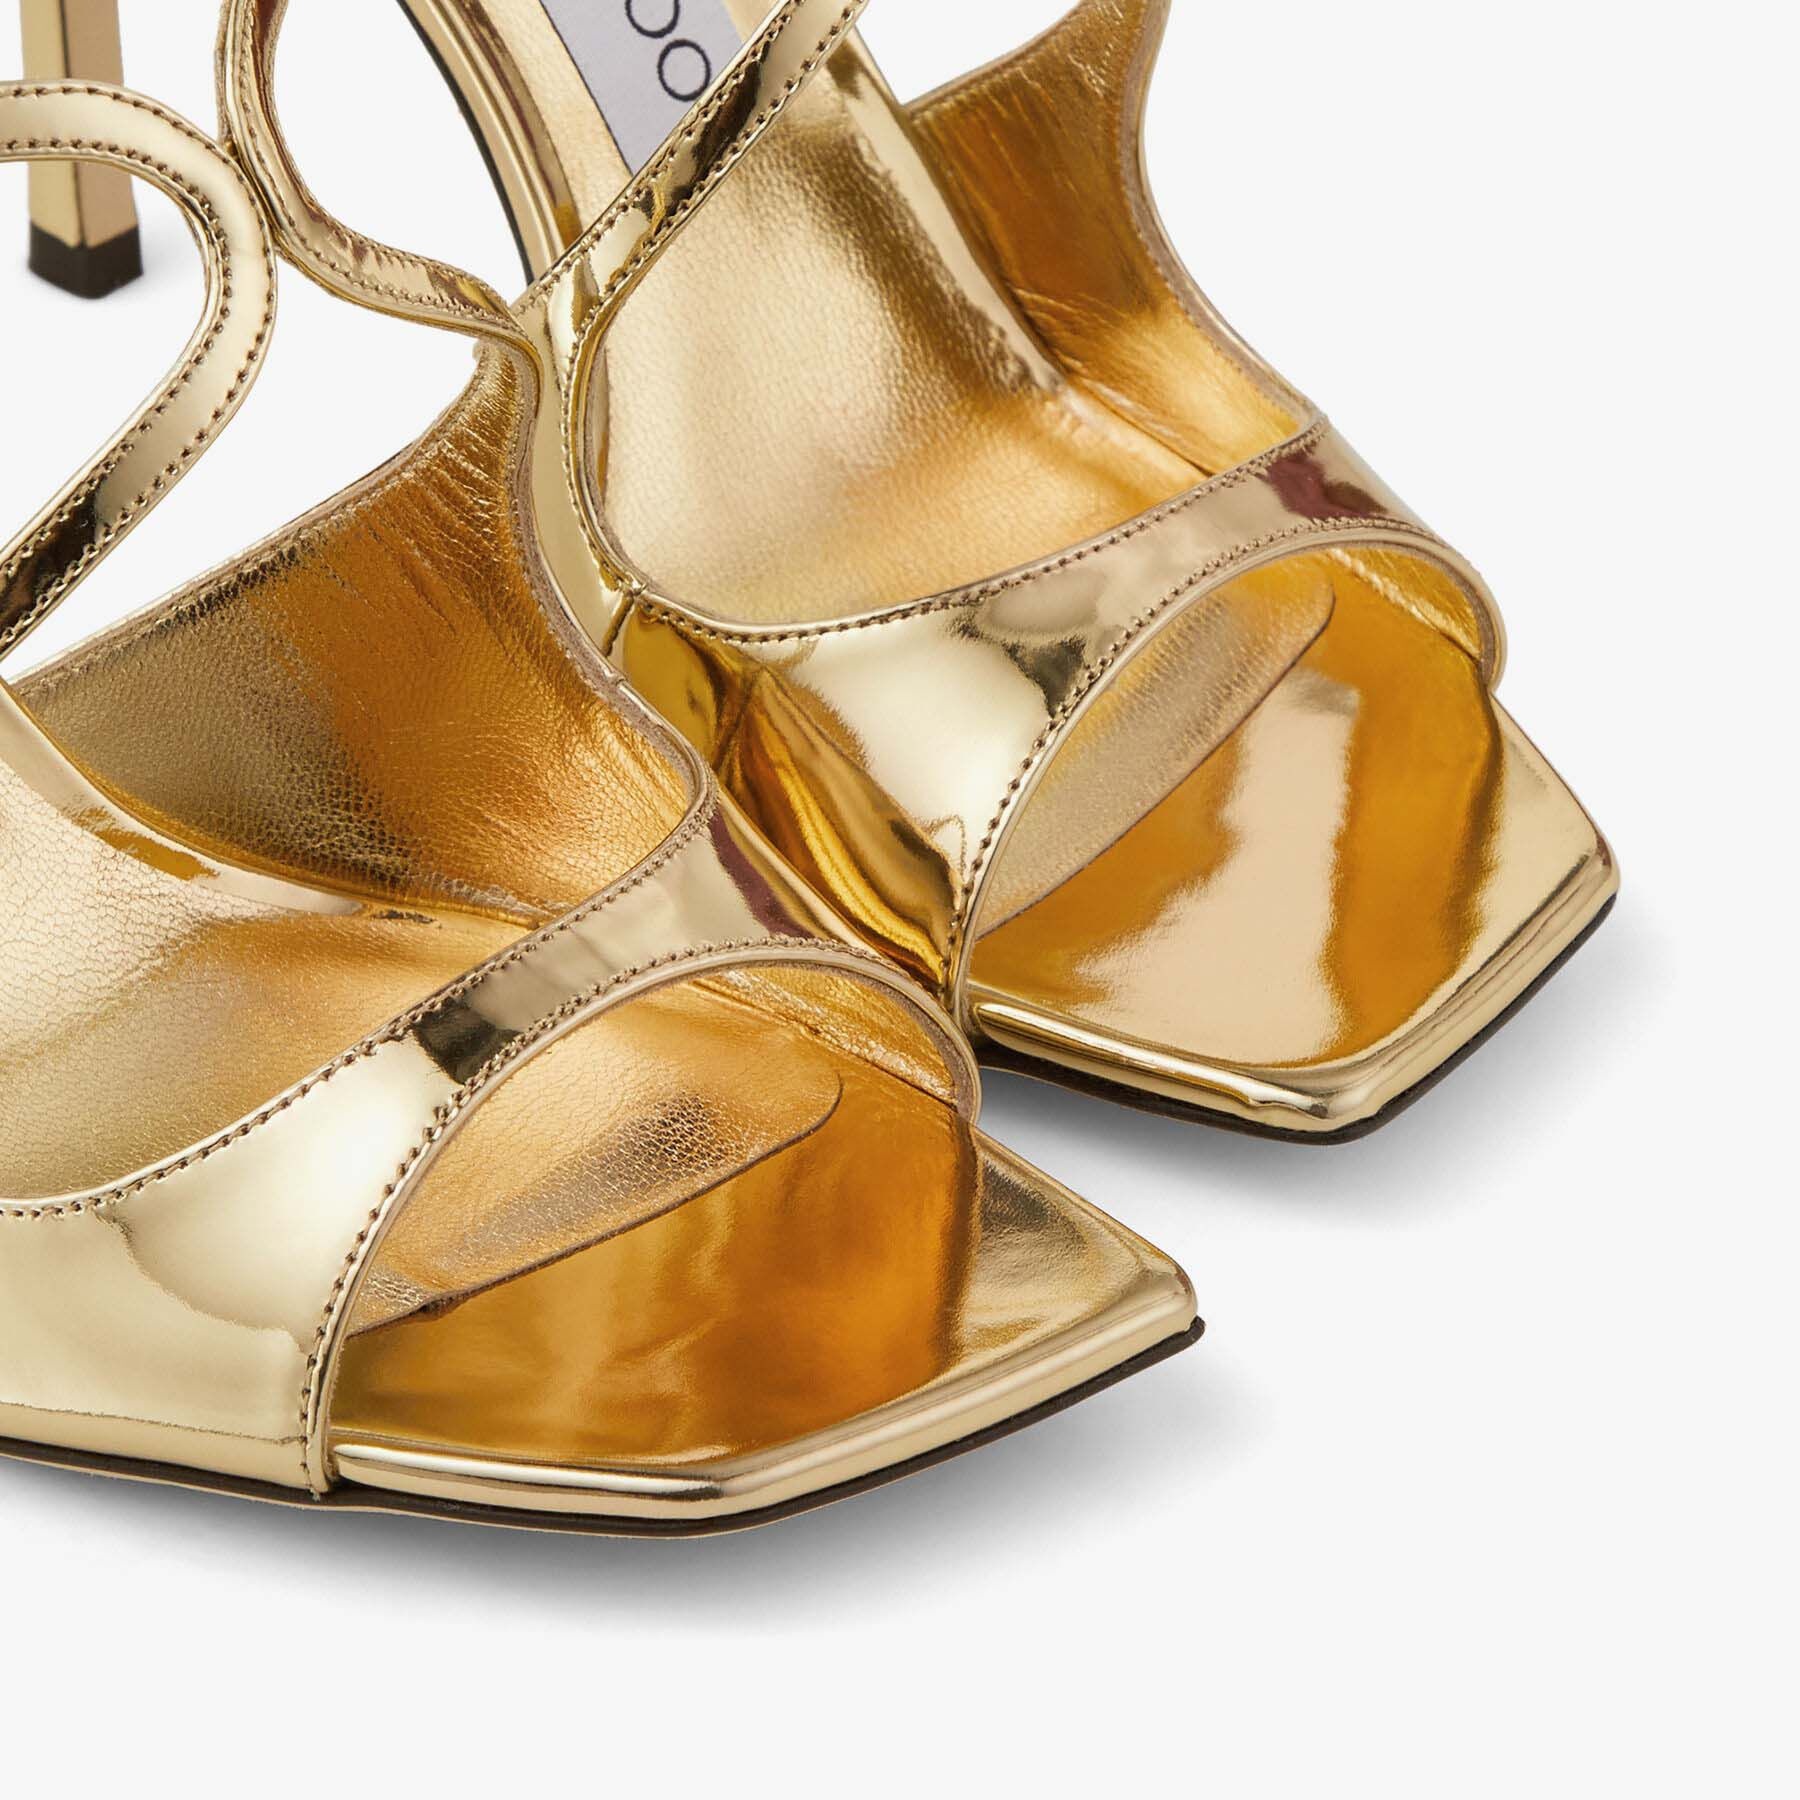 Anise 95
Gold Liquid Metal Leather Mules - 4